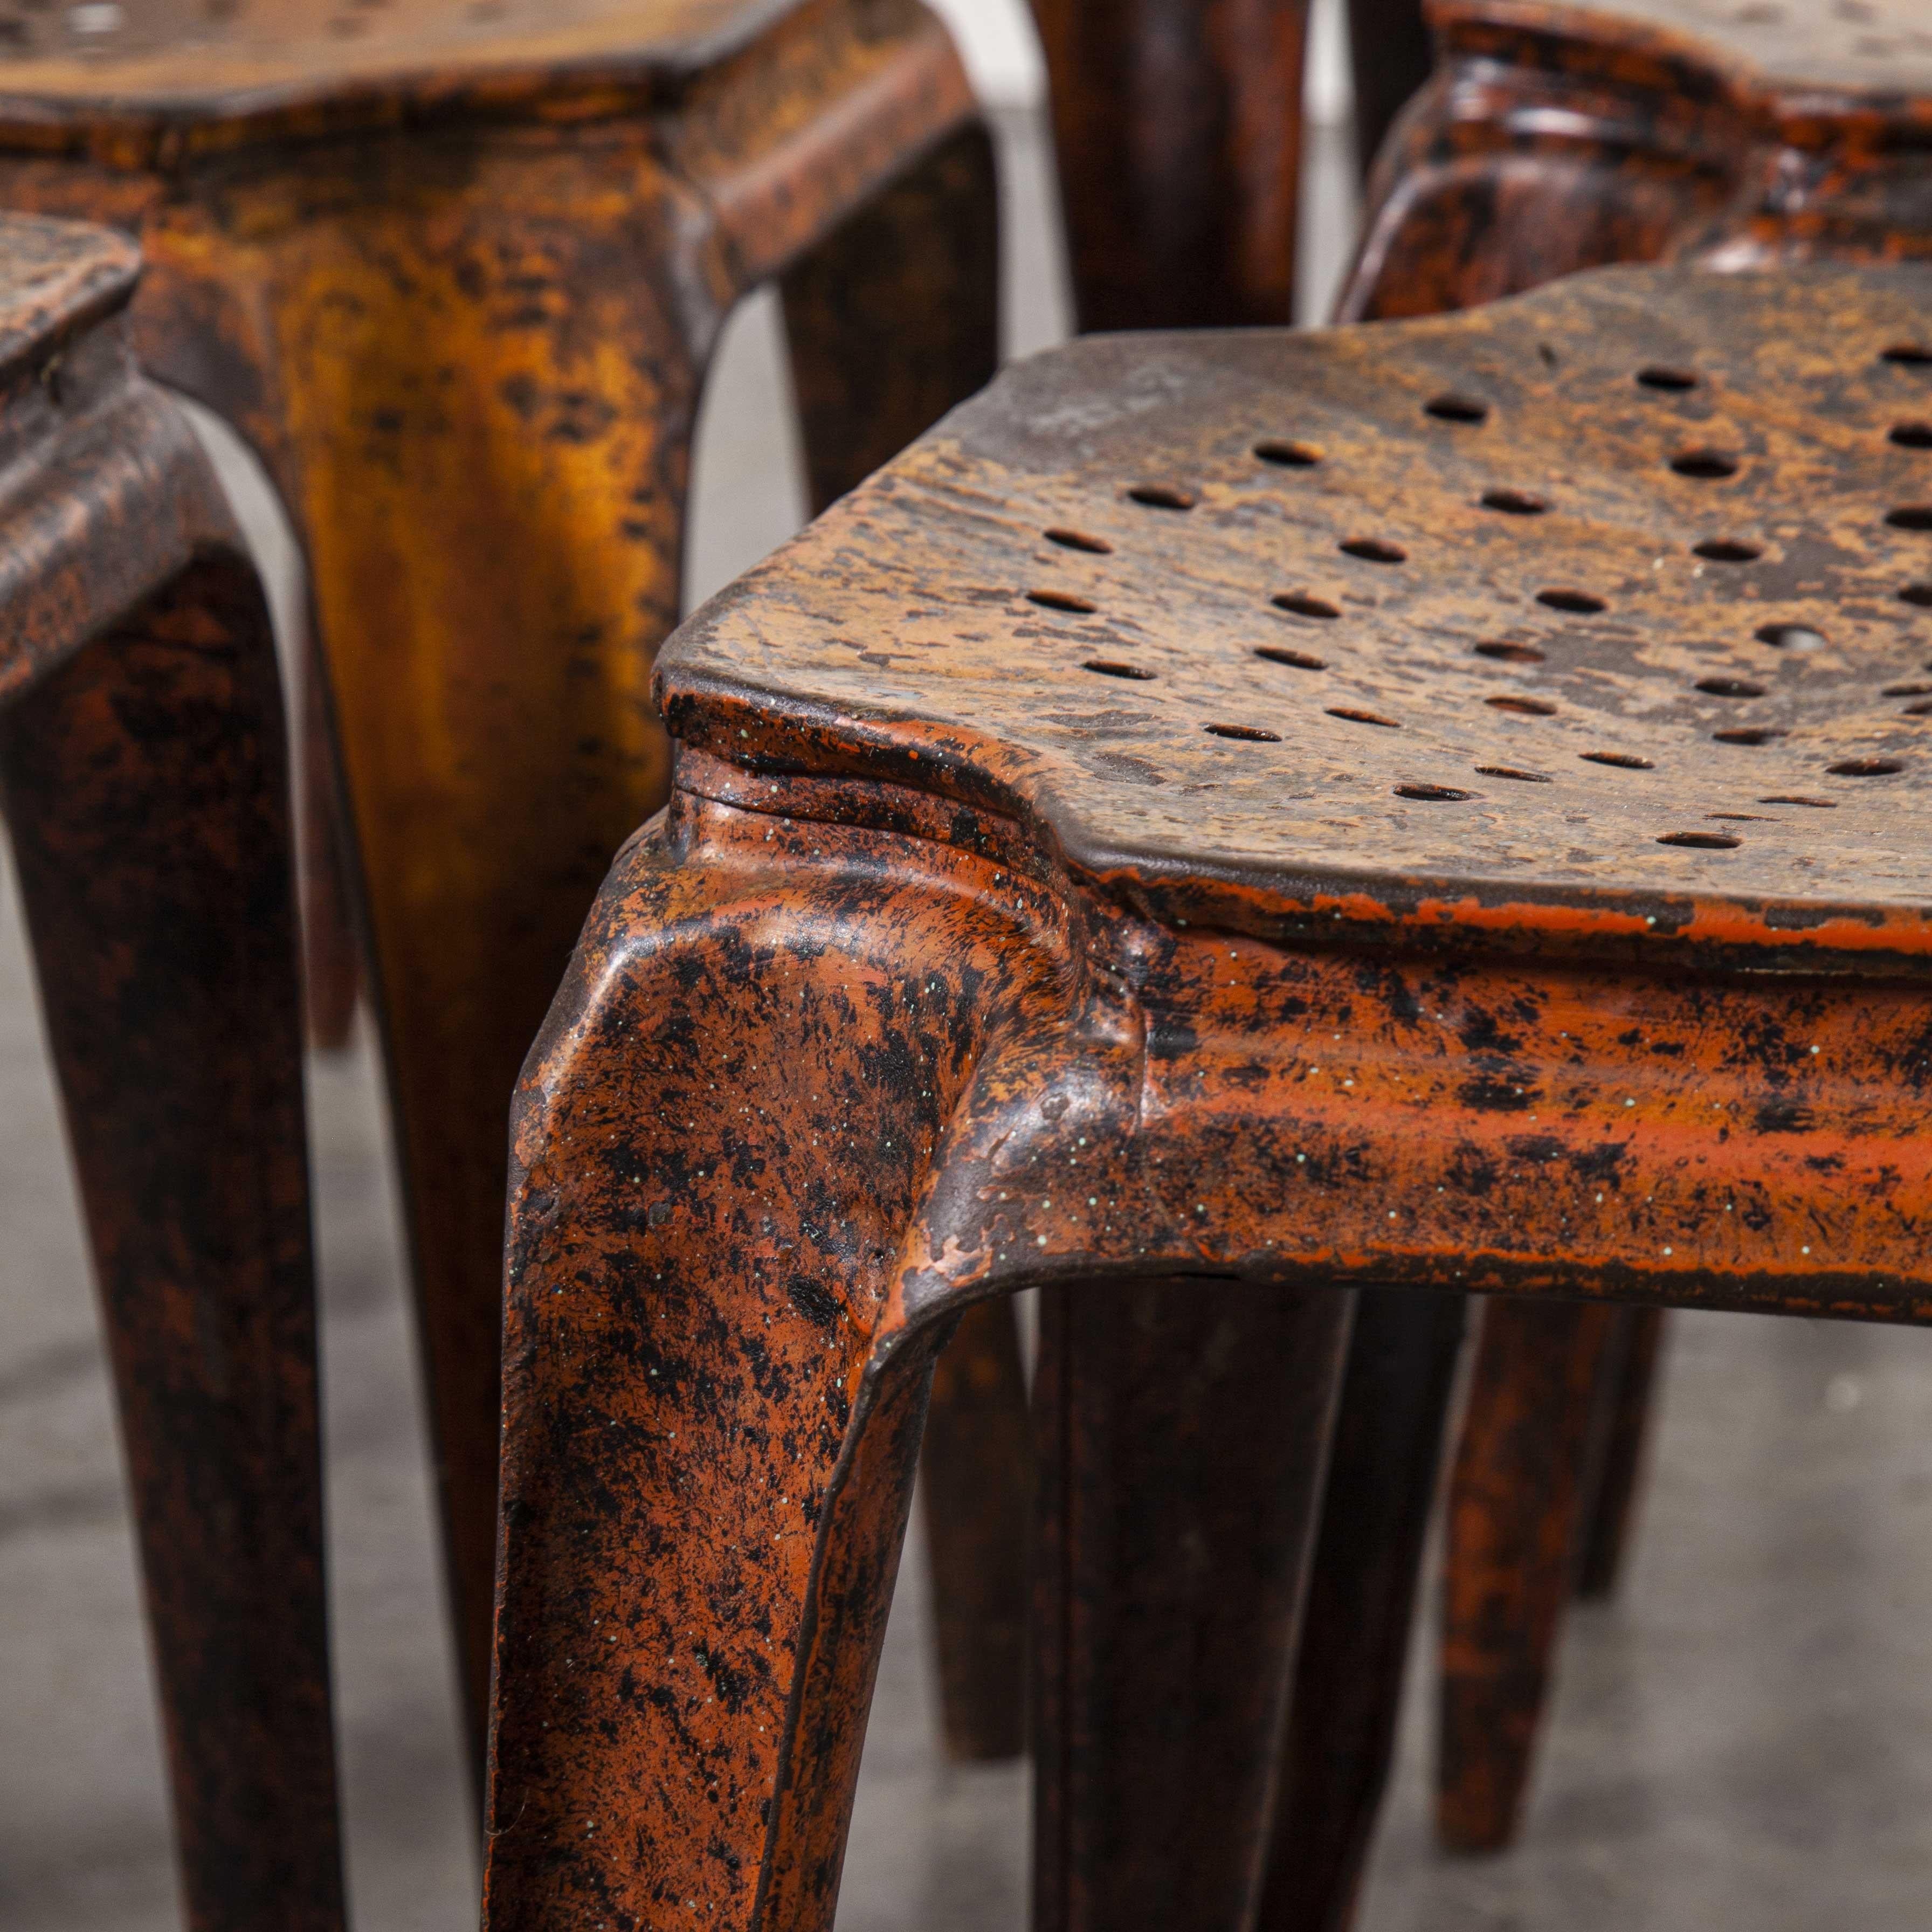 1940s original Multipl's stools, set of six

1940s original Multipl's stools in exceptional original condition - set of six. Designed by Joseph Mathieu and made in Pierre Benite in Lyon. Multipl's chairs are an iconic part of Industrial French